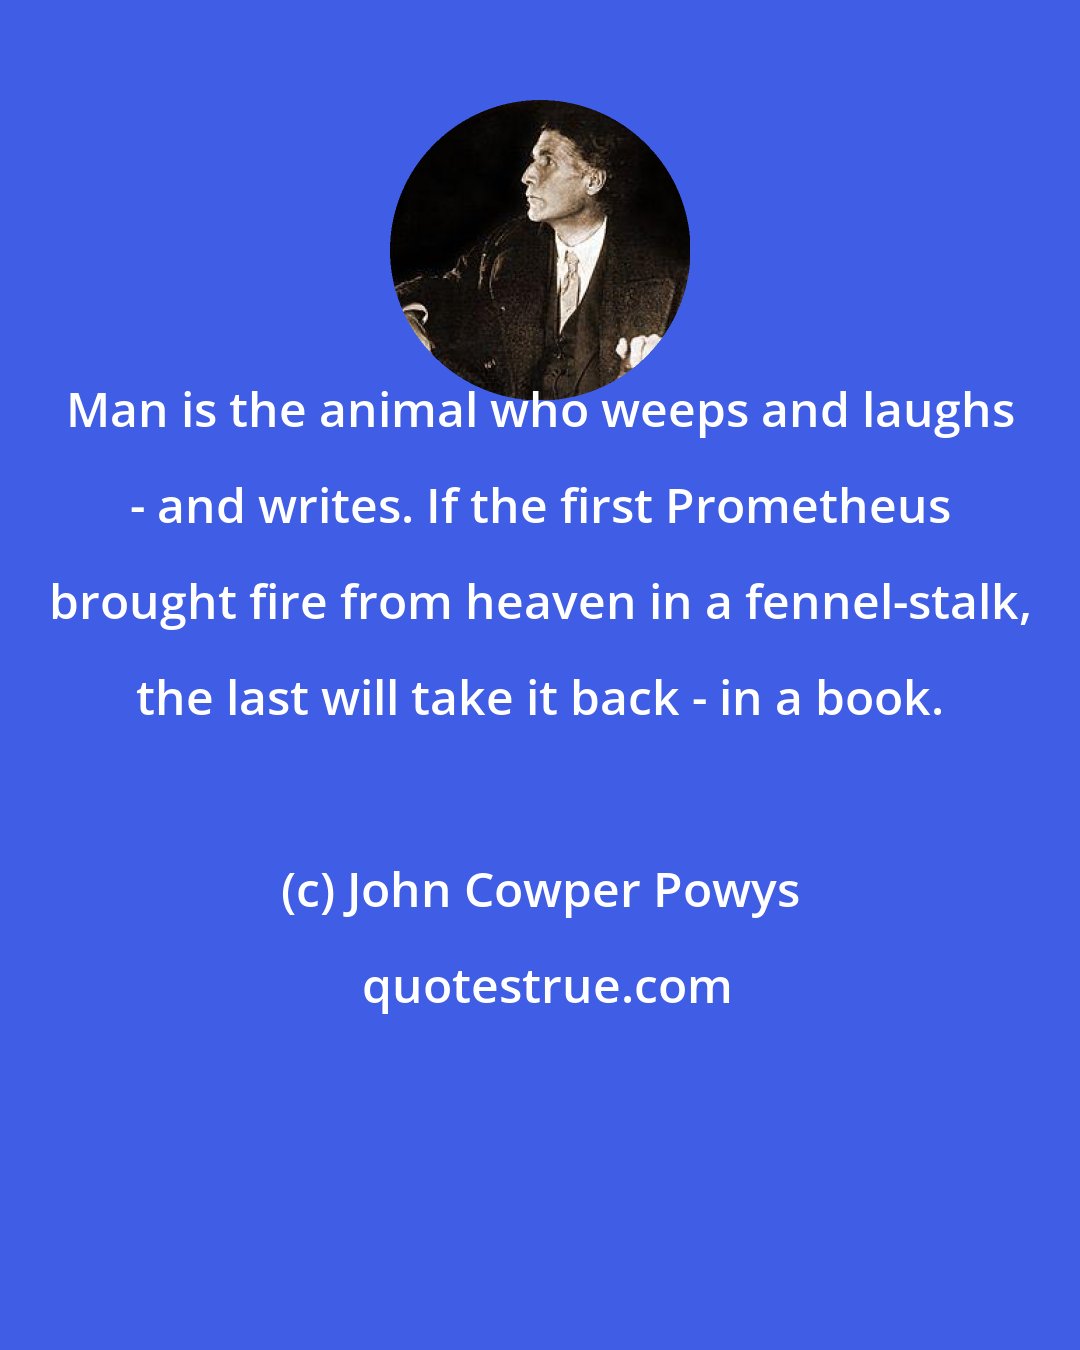 John Cowper Powys: Man is the animal who weeps and laughs - and writes. If the first Prometheus brought fire from heaven in a fennel-stalk, the last will take it back - in a book.